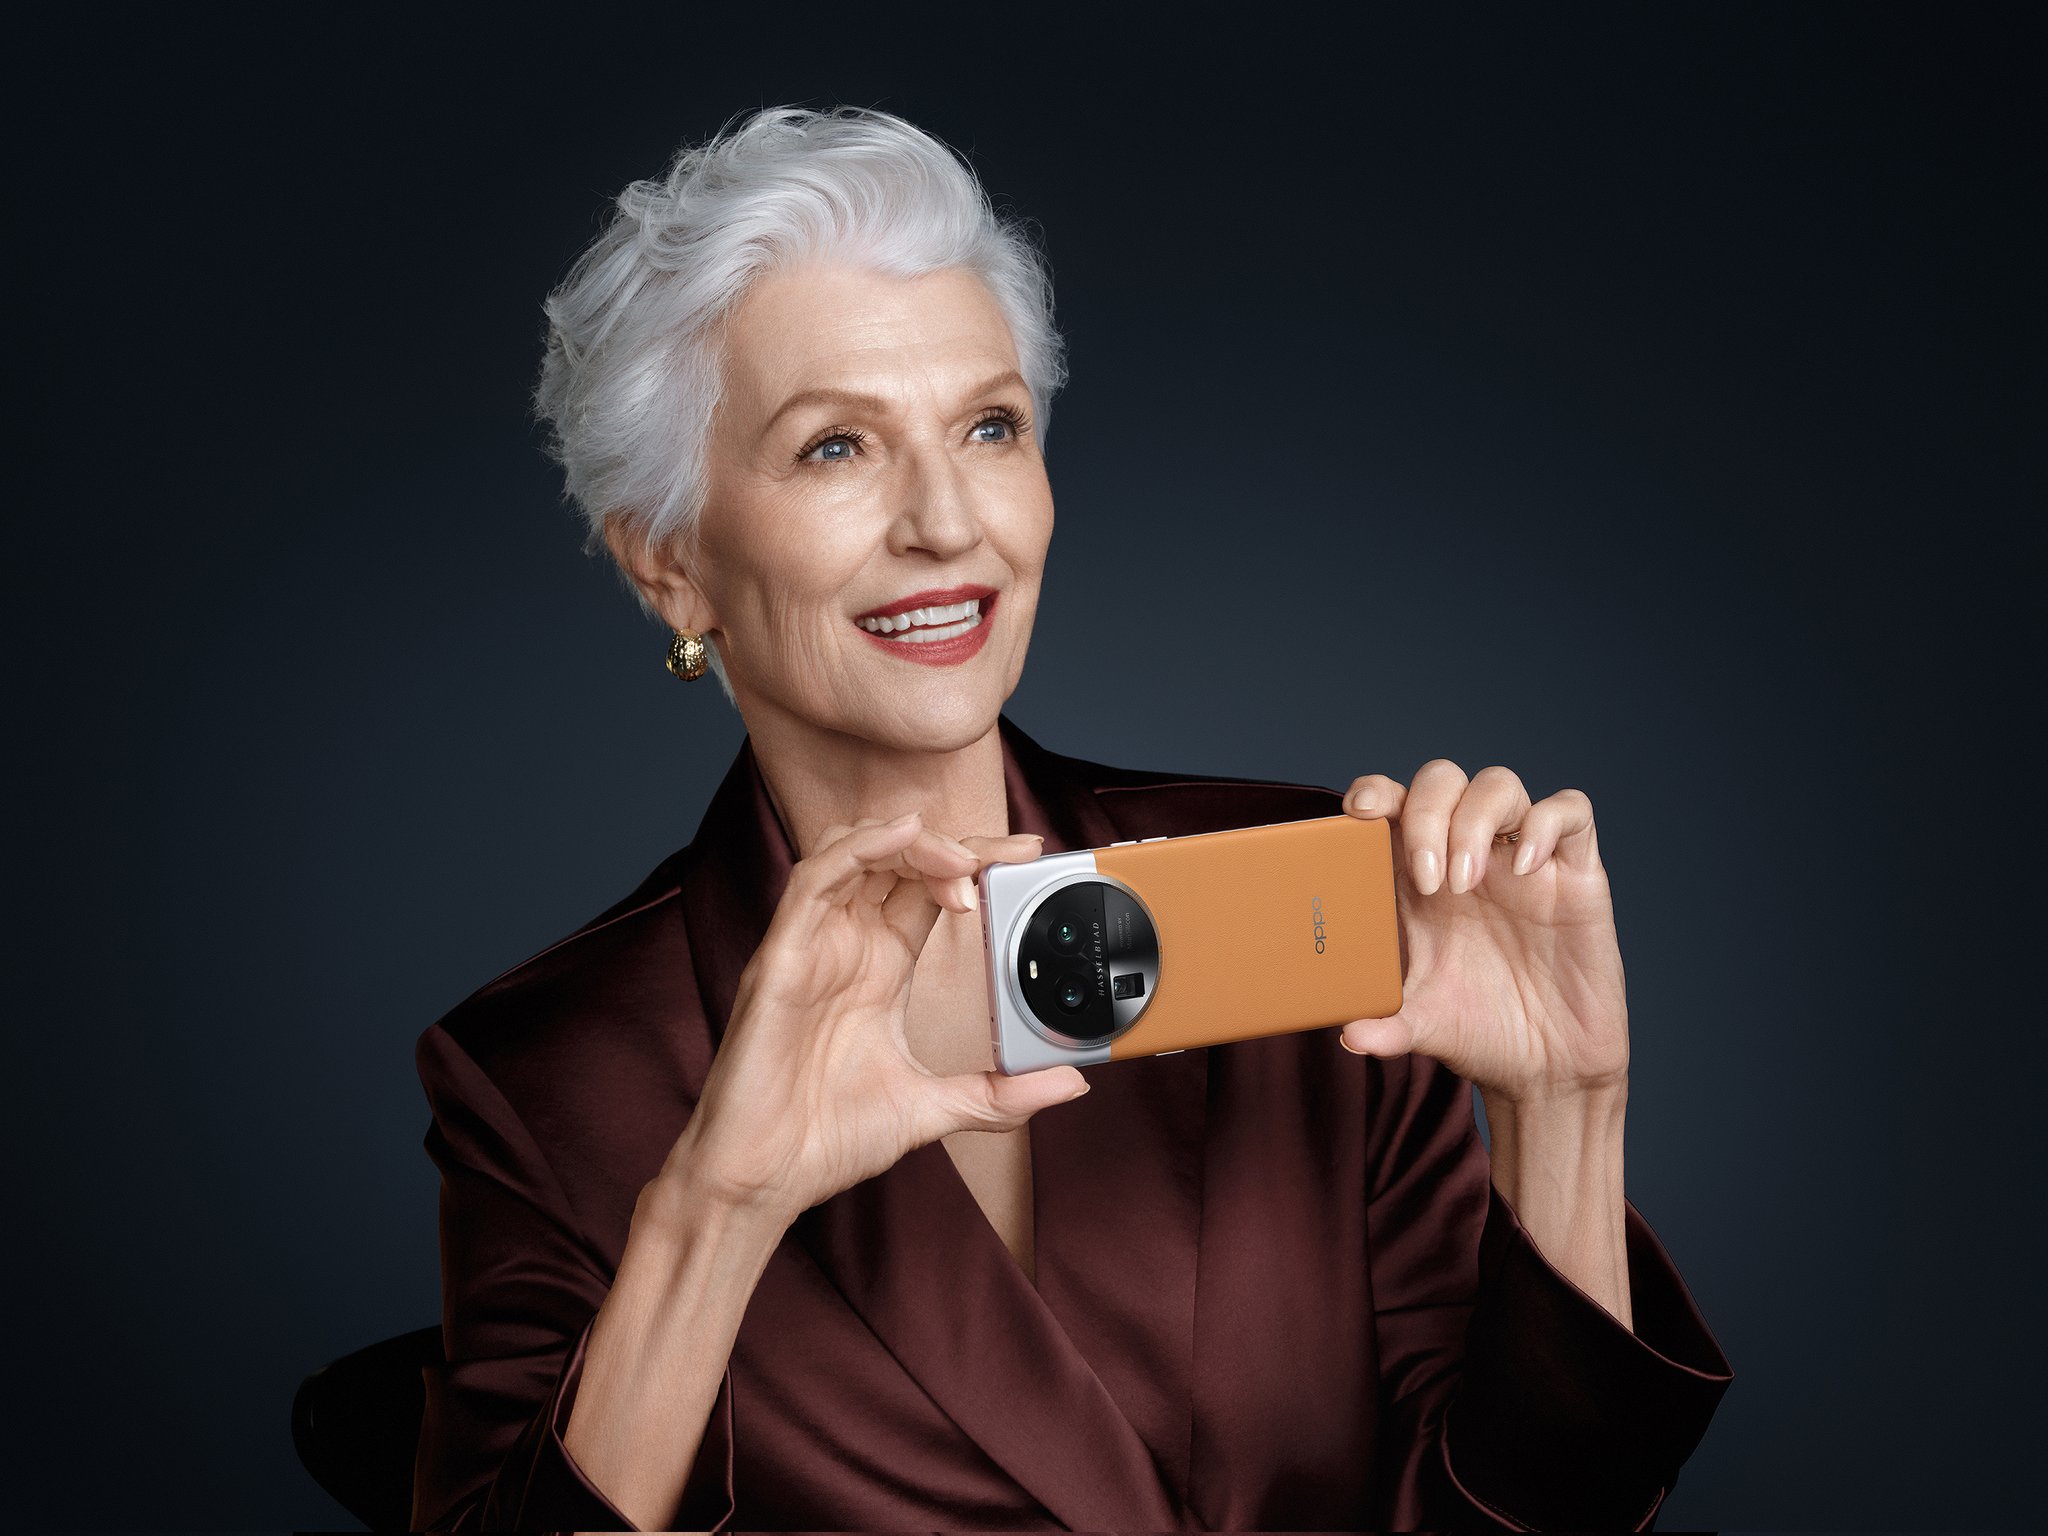 Ilon Musk's mum becomes OPPO ambassador and promotes Find X6 Pro smartphone